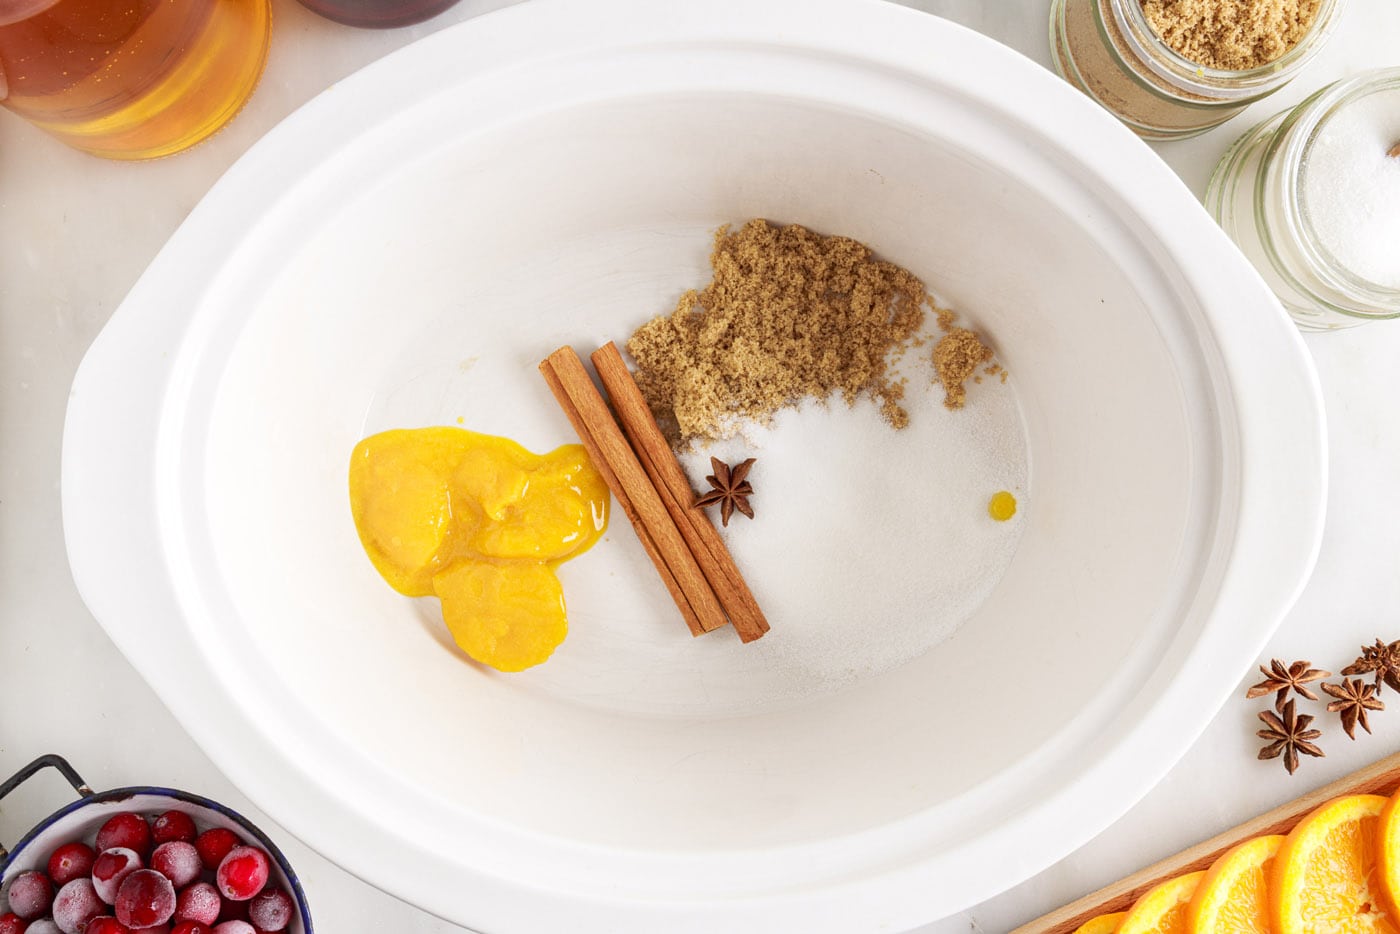 orange juice concentrate, sugars, cinnamon sticks and star anise in crockpot